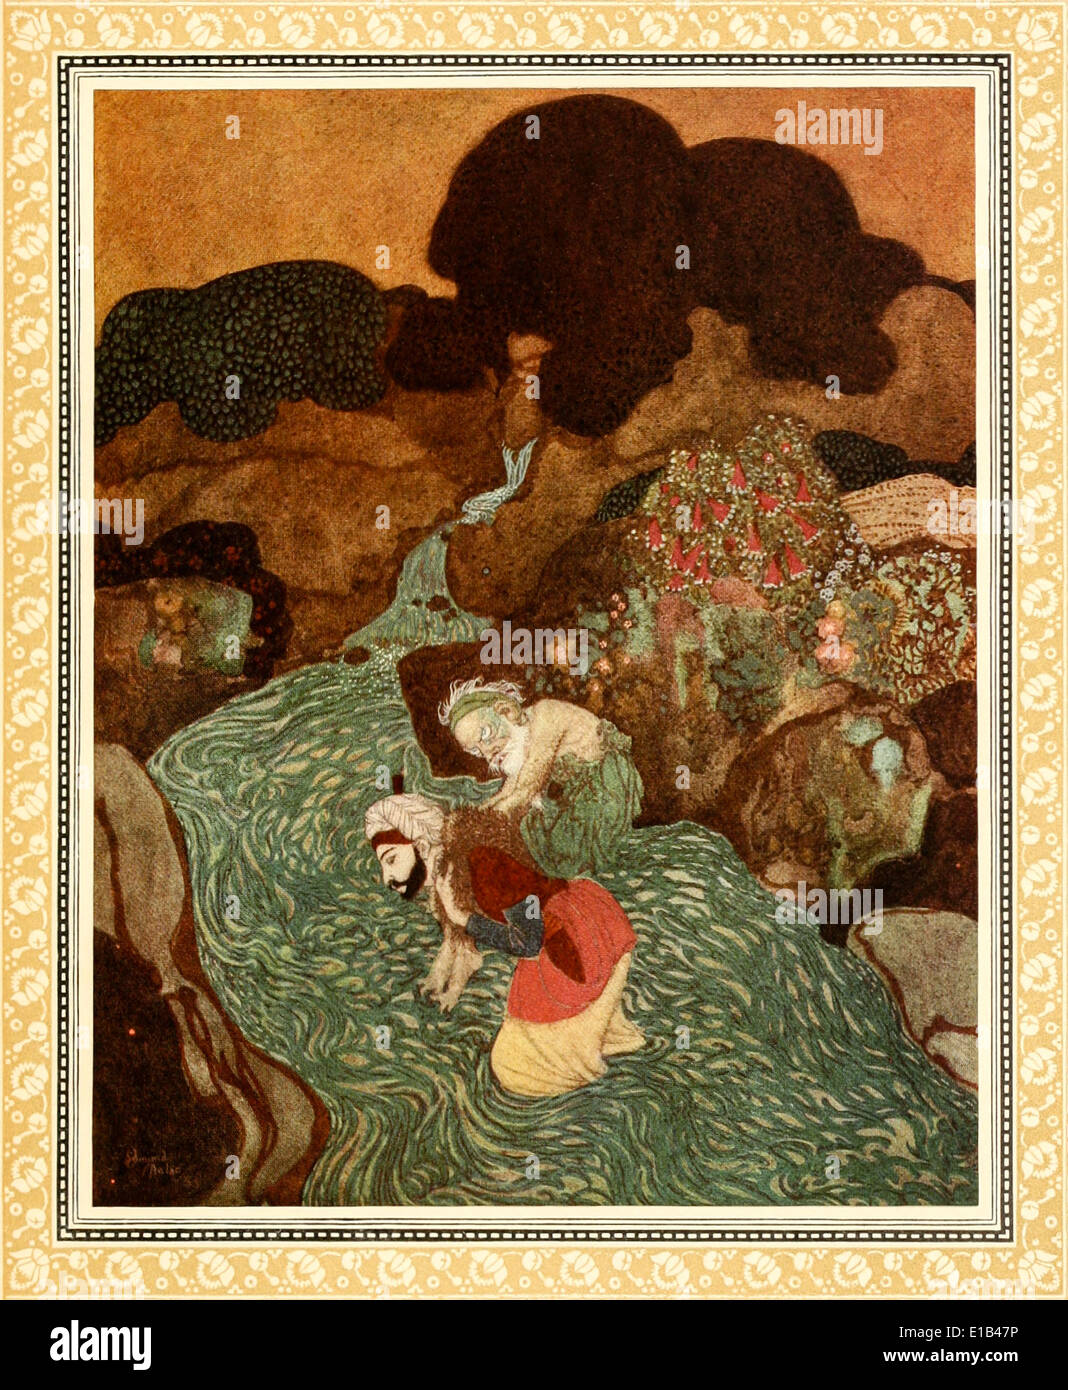 Edmund Dulac (1882-1953) illustration from ‘Sinbad the Sailor & Other Stories from the Arabian Nights’. Old Man of the sea Stock Photo